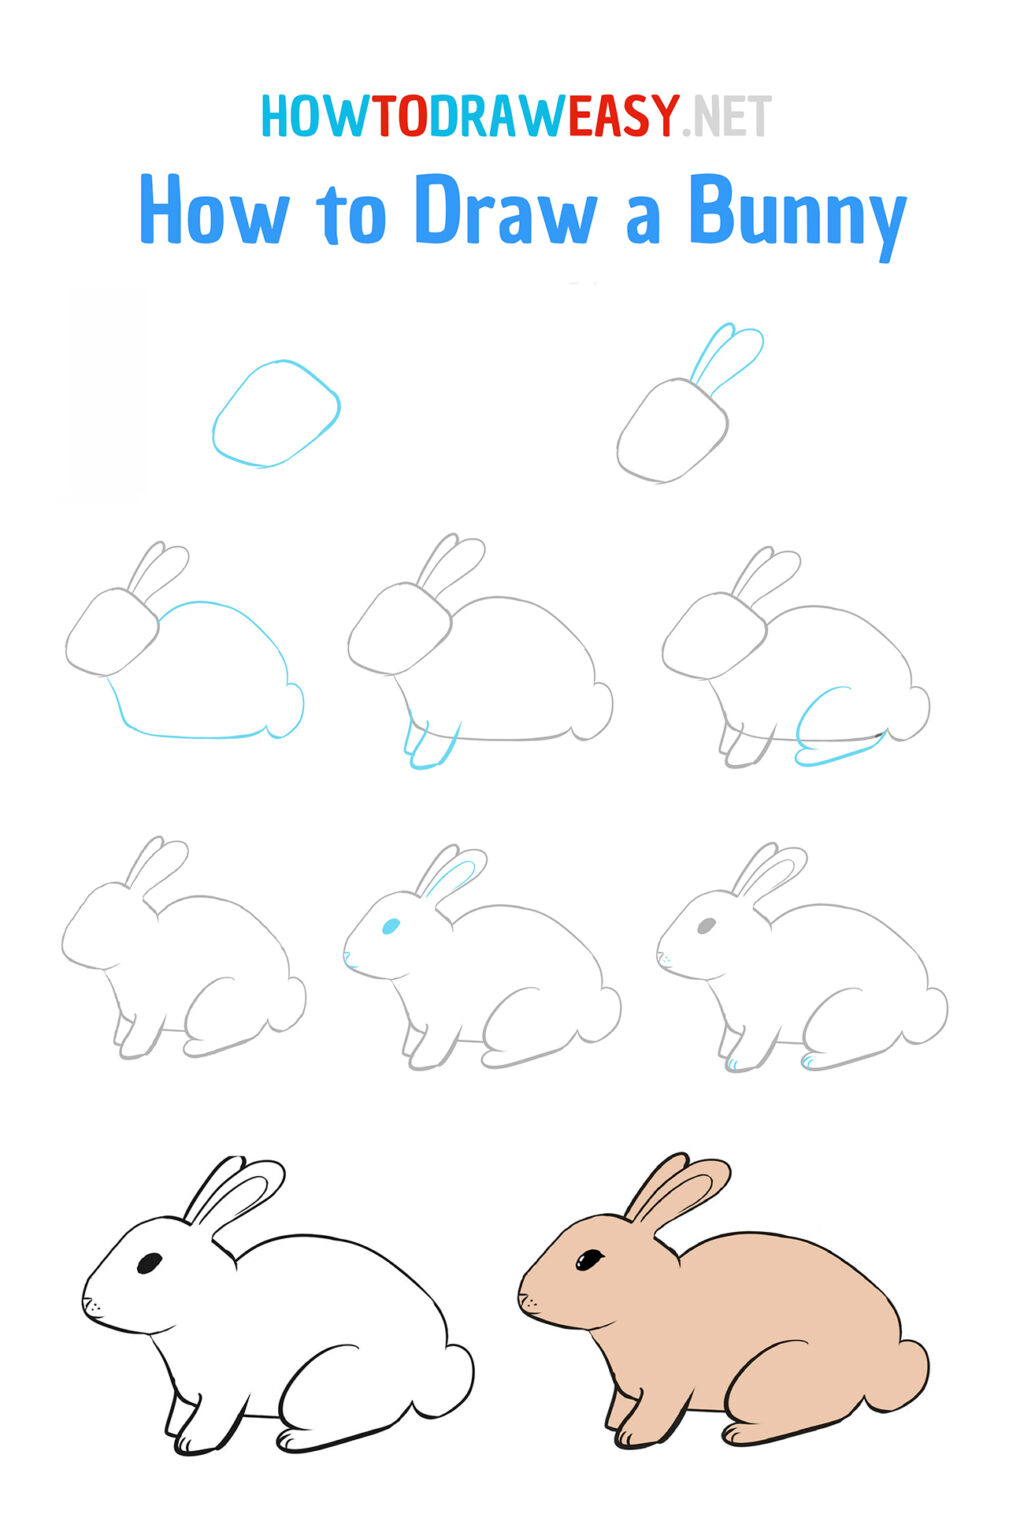 How to Draw a Bunny How to Draw Easy